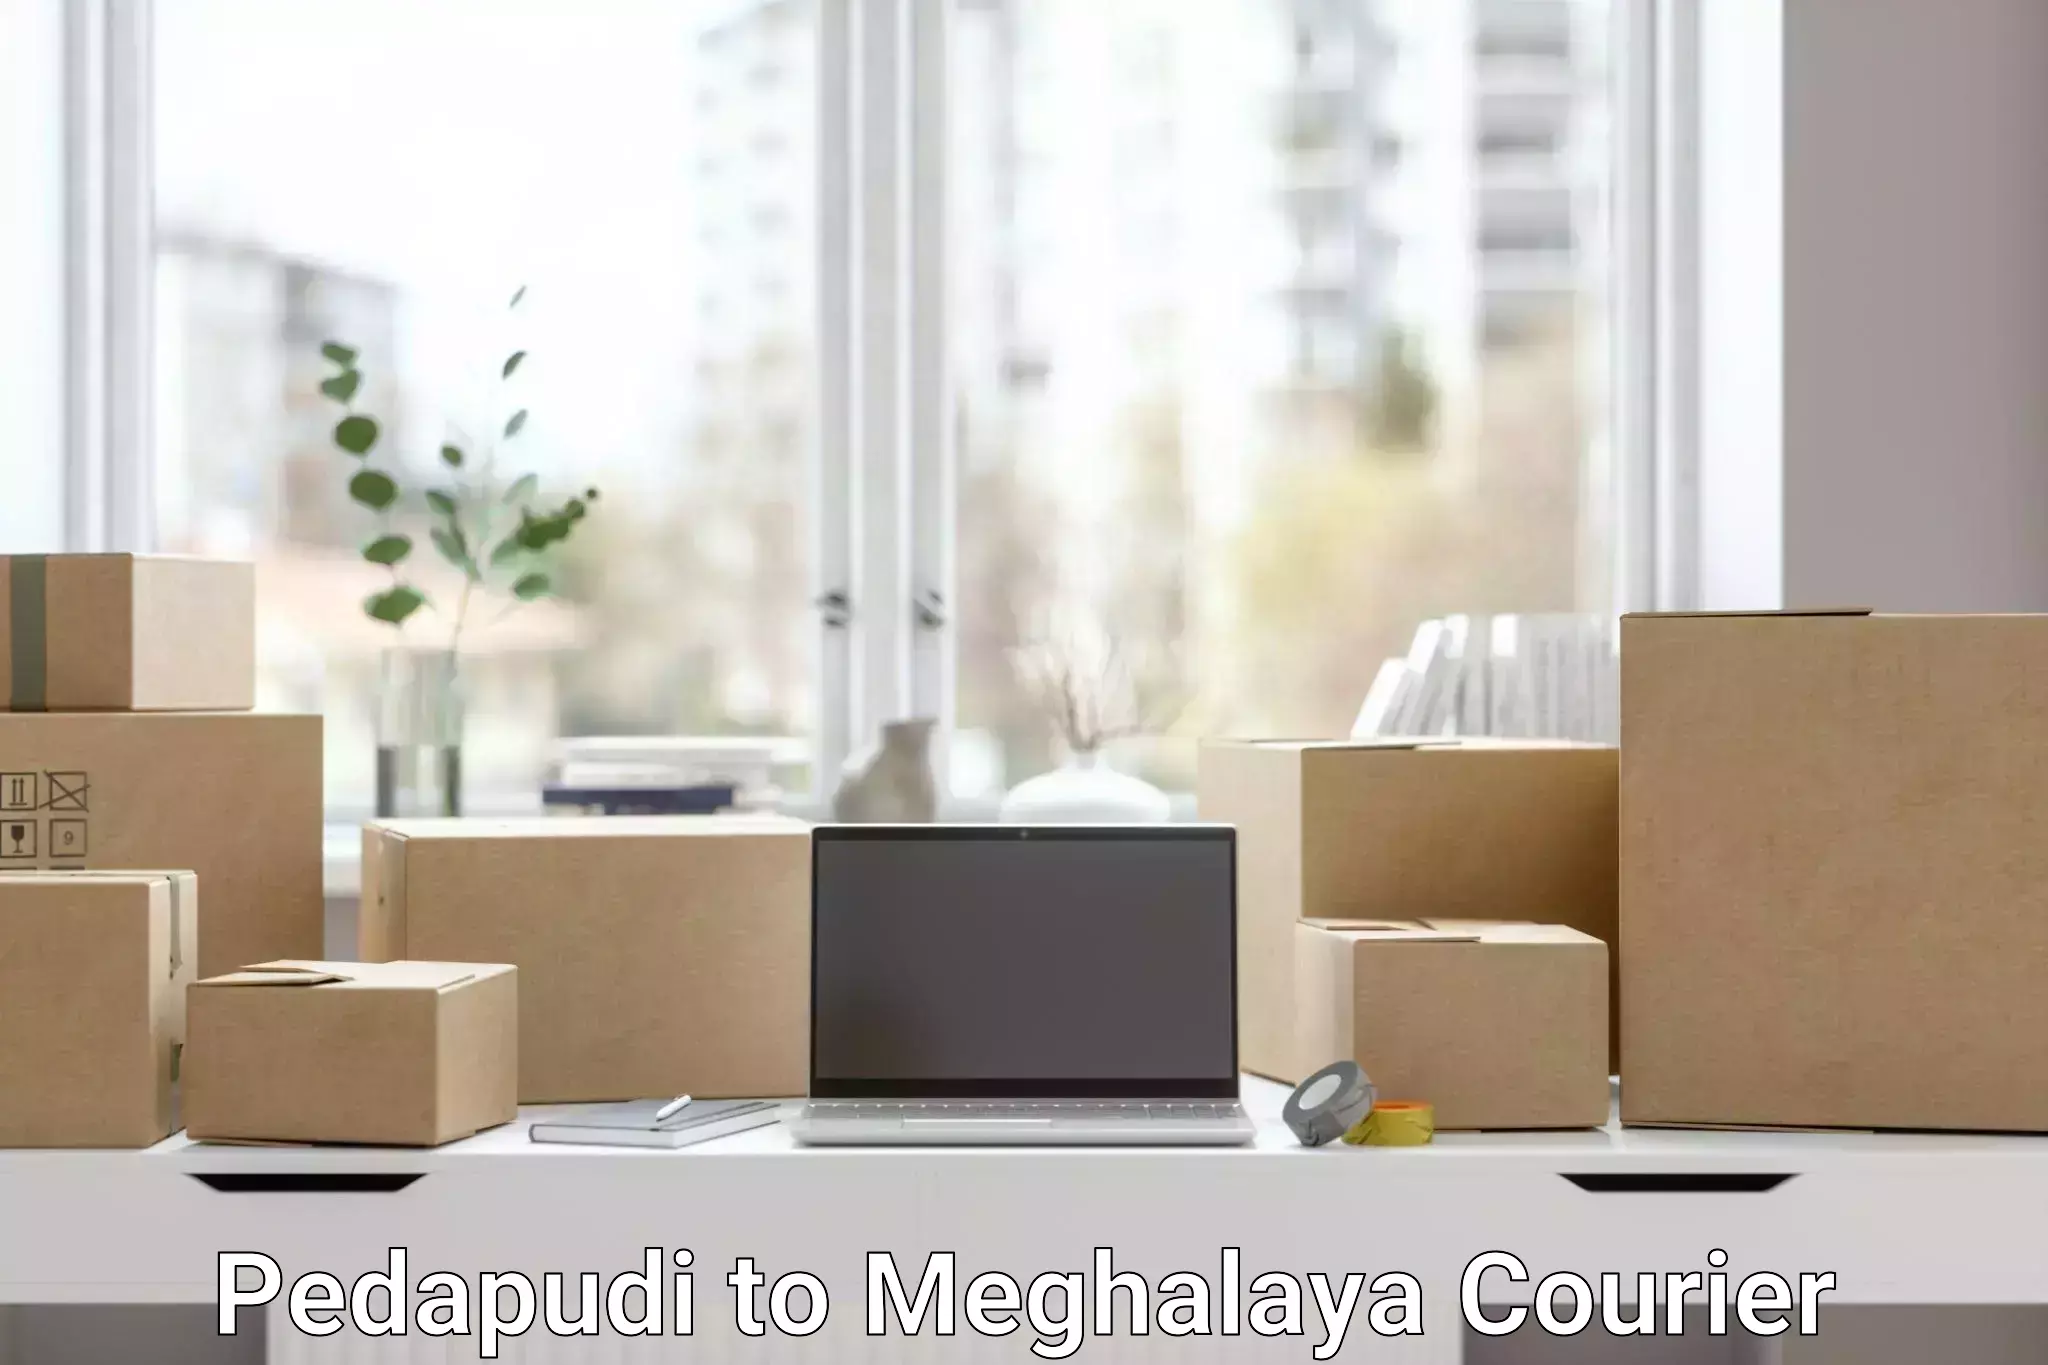 Package delivery network Pedapudi to Meghalaya